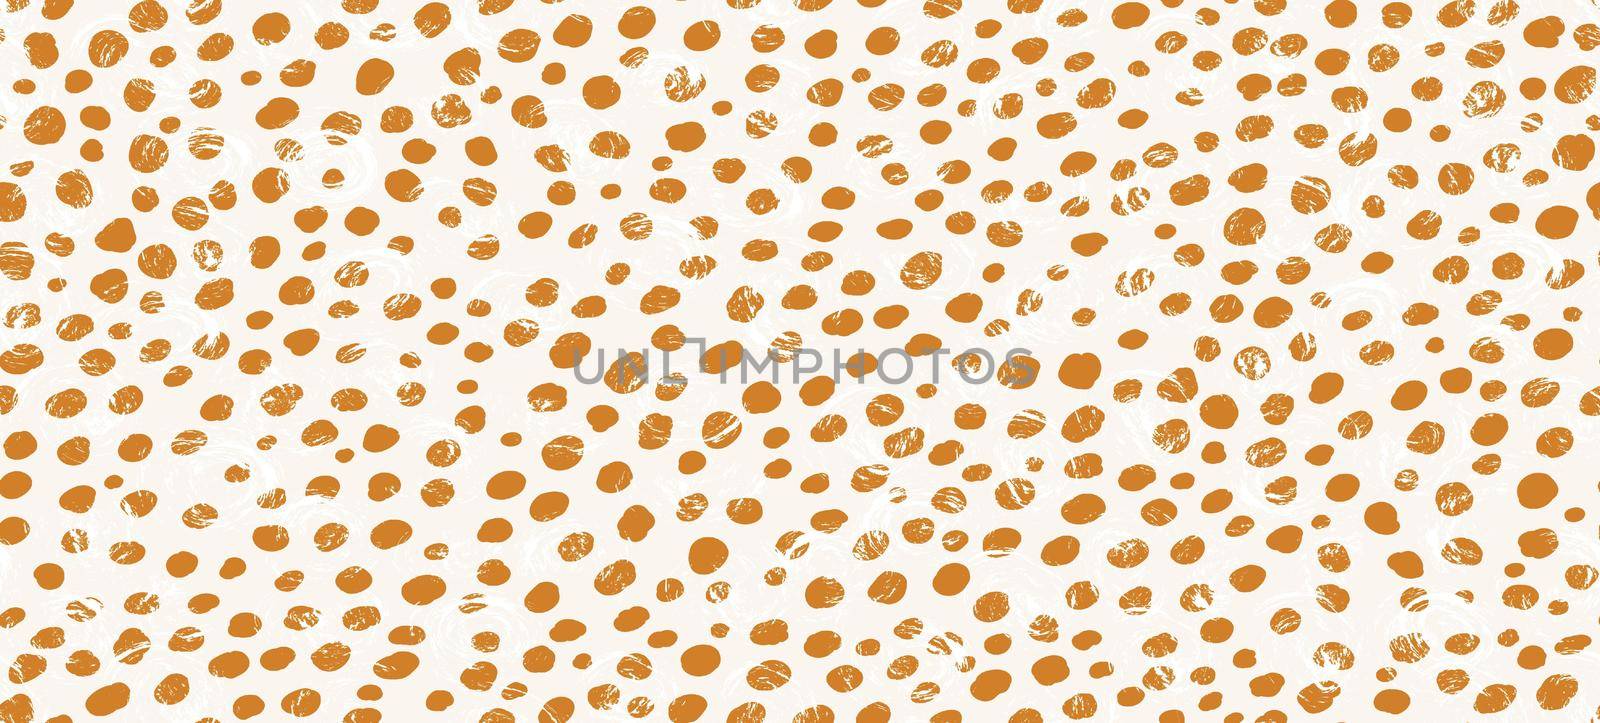 Abstract modern leopard seamless pattern. Animals trendy background. Brown and white decorative vector stock illustration for print, card, postcard, fabric, textile. Modern ornament of stylized skin.